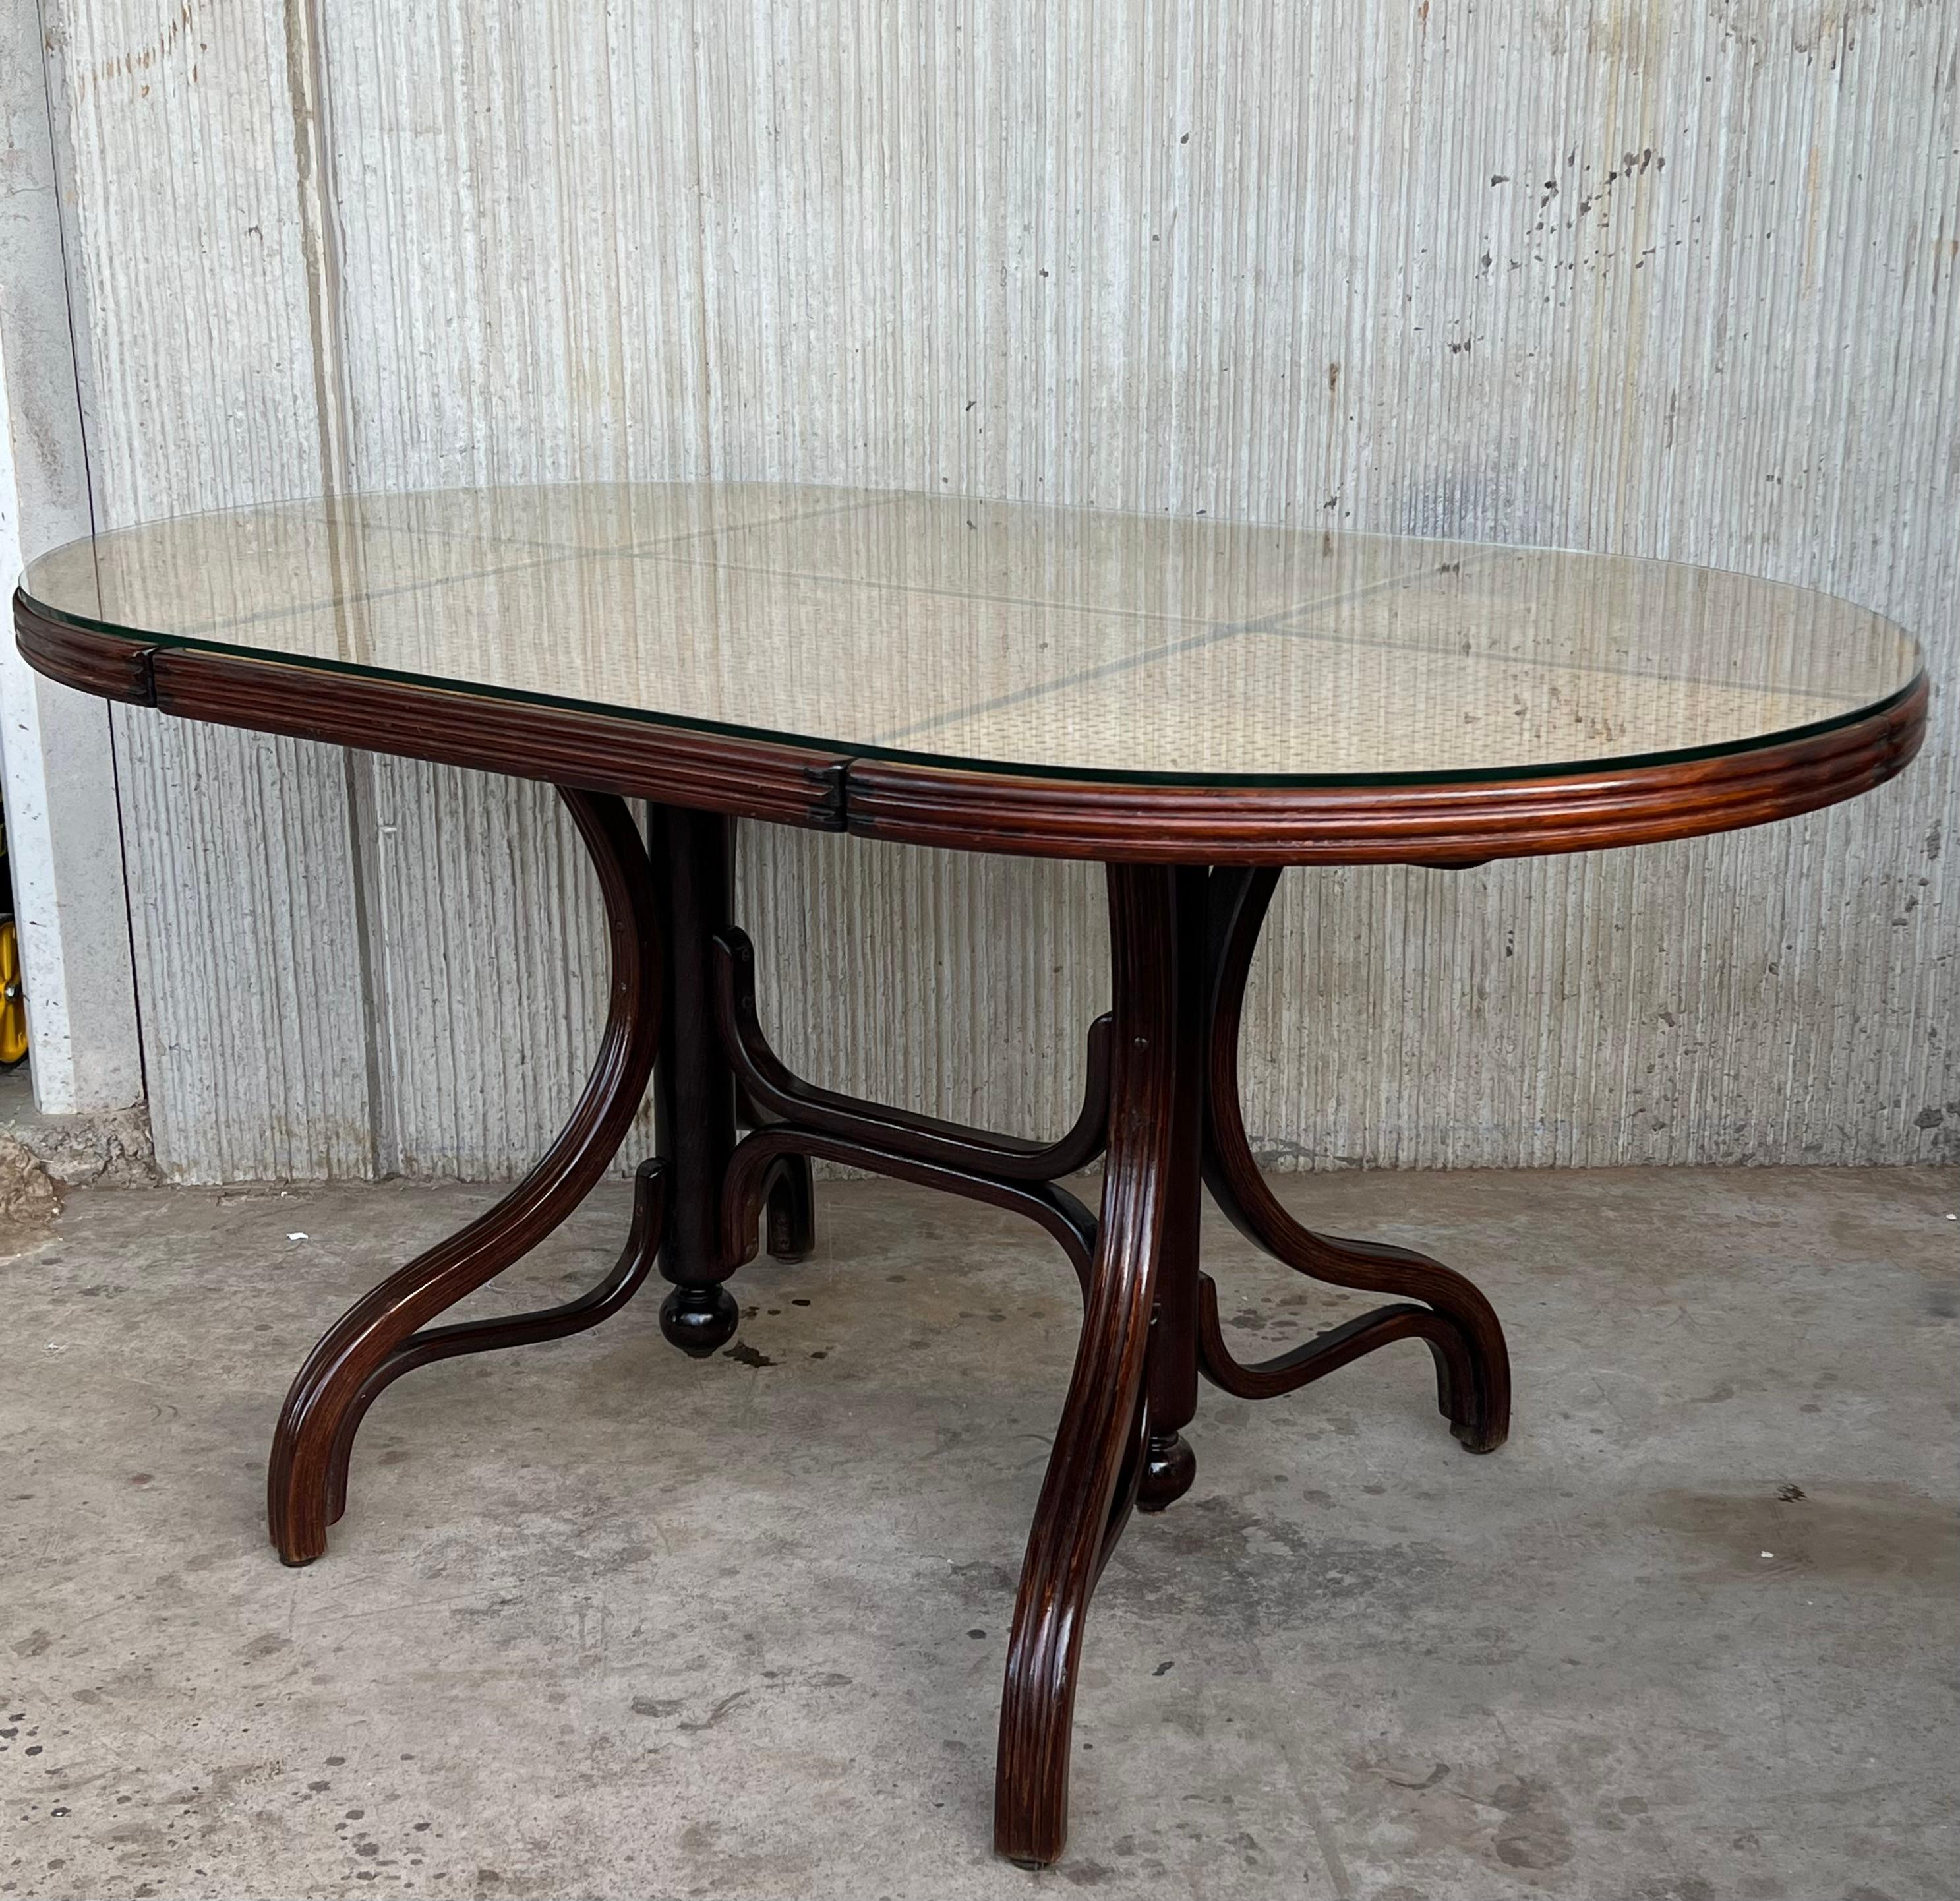 20th Century Oval Dining Table in Wood, Cane and Glass, Germany, 1970s